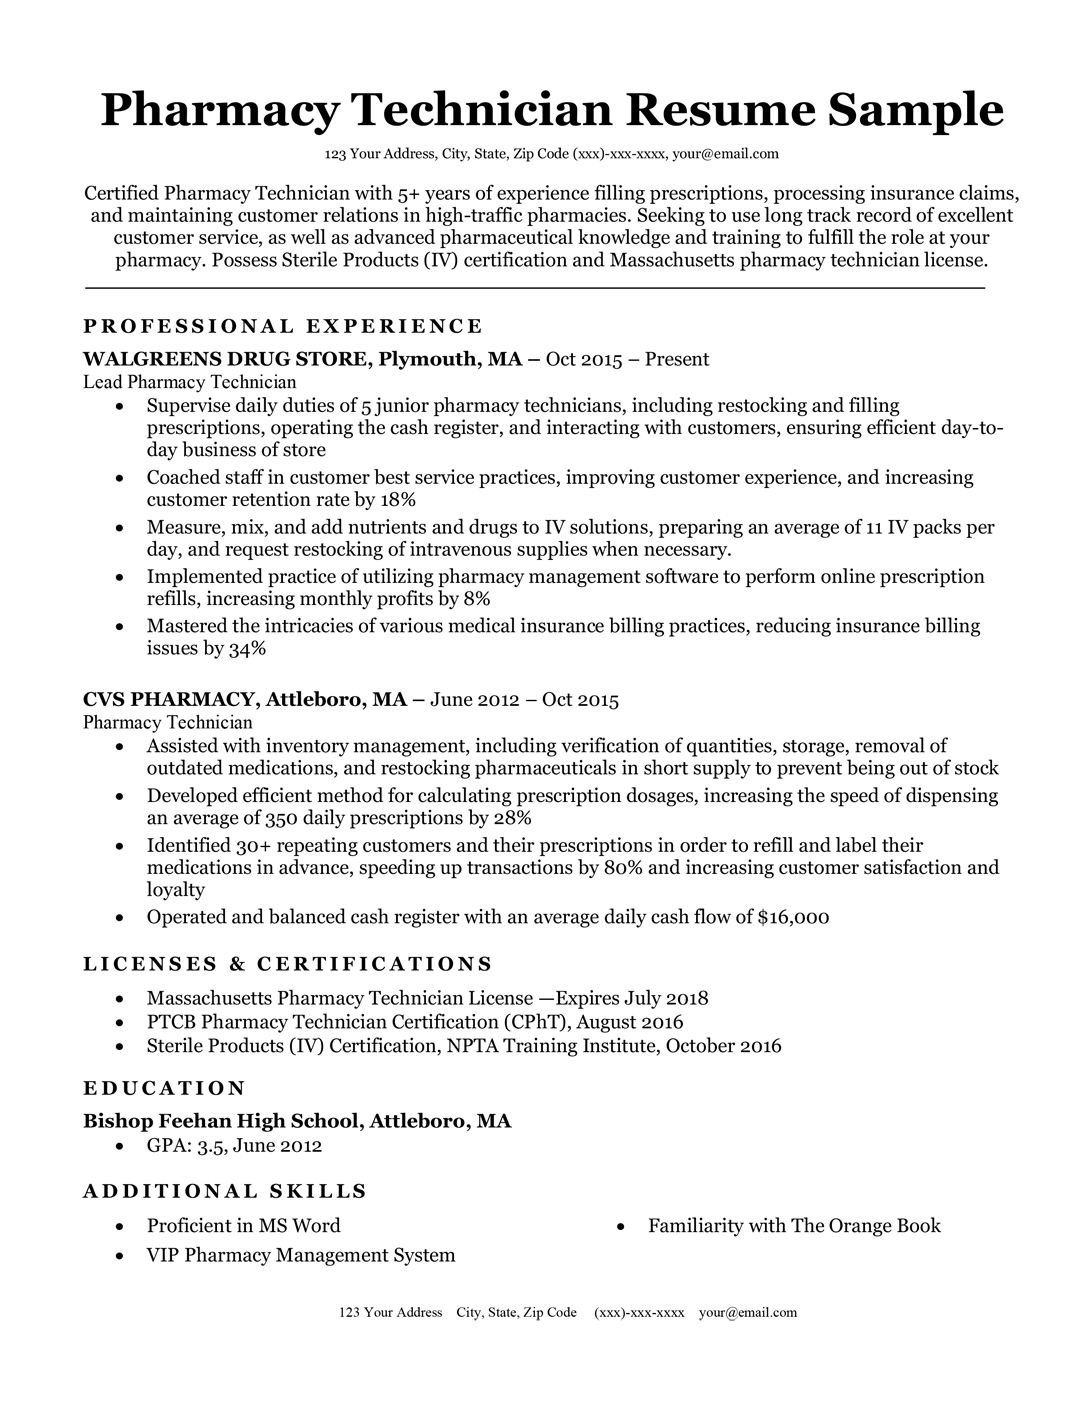 Resume Format For Pharmacist from resumecompanion.com